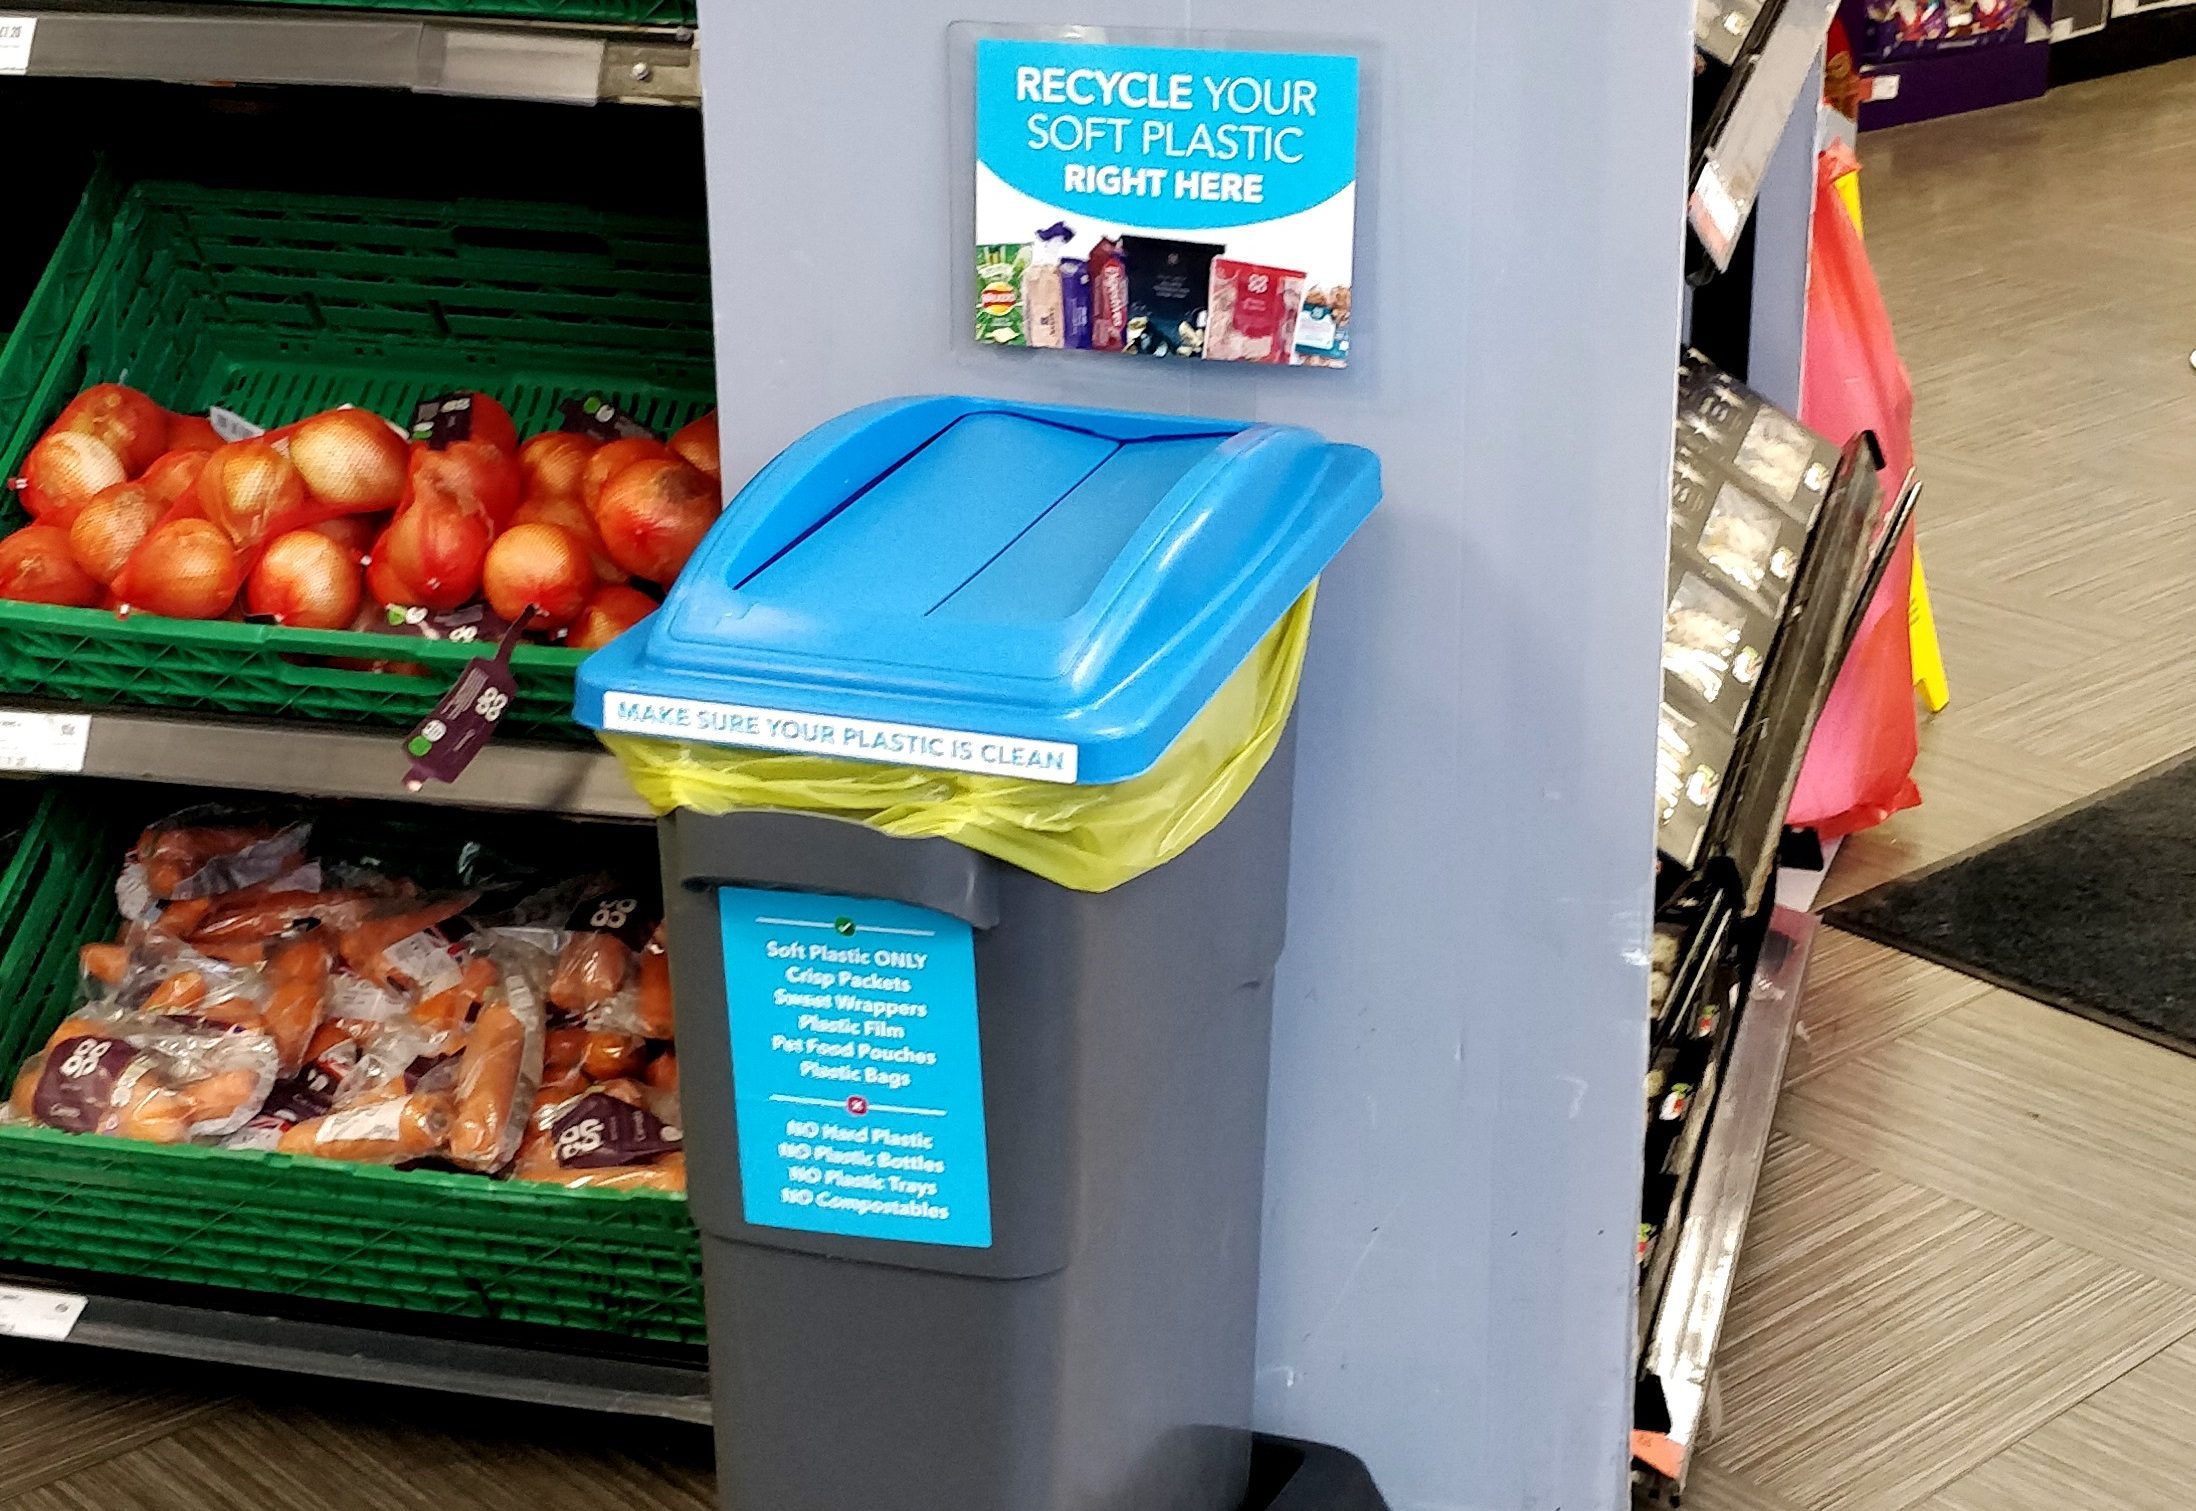 Soft plastic recycling? Binfield and Wokingham Co-ops have it in